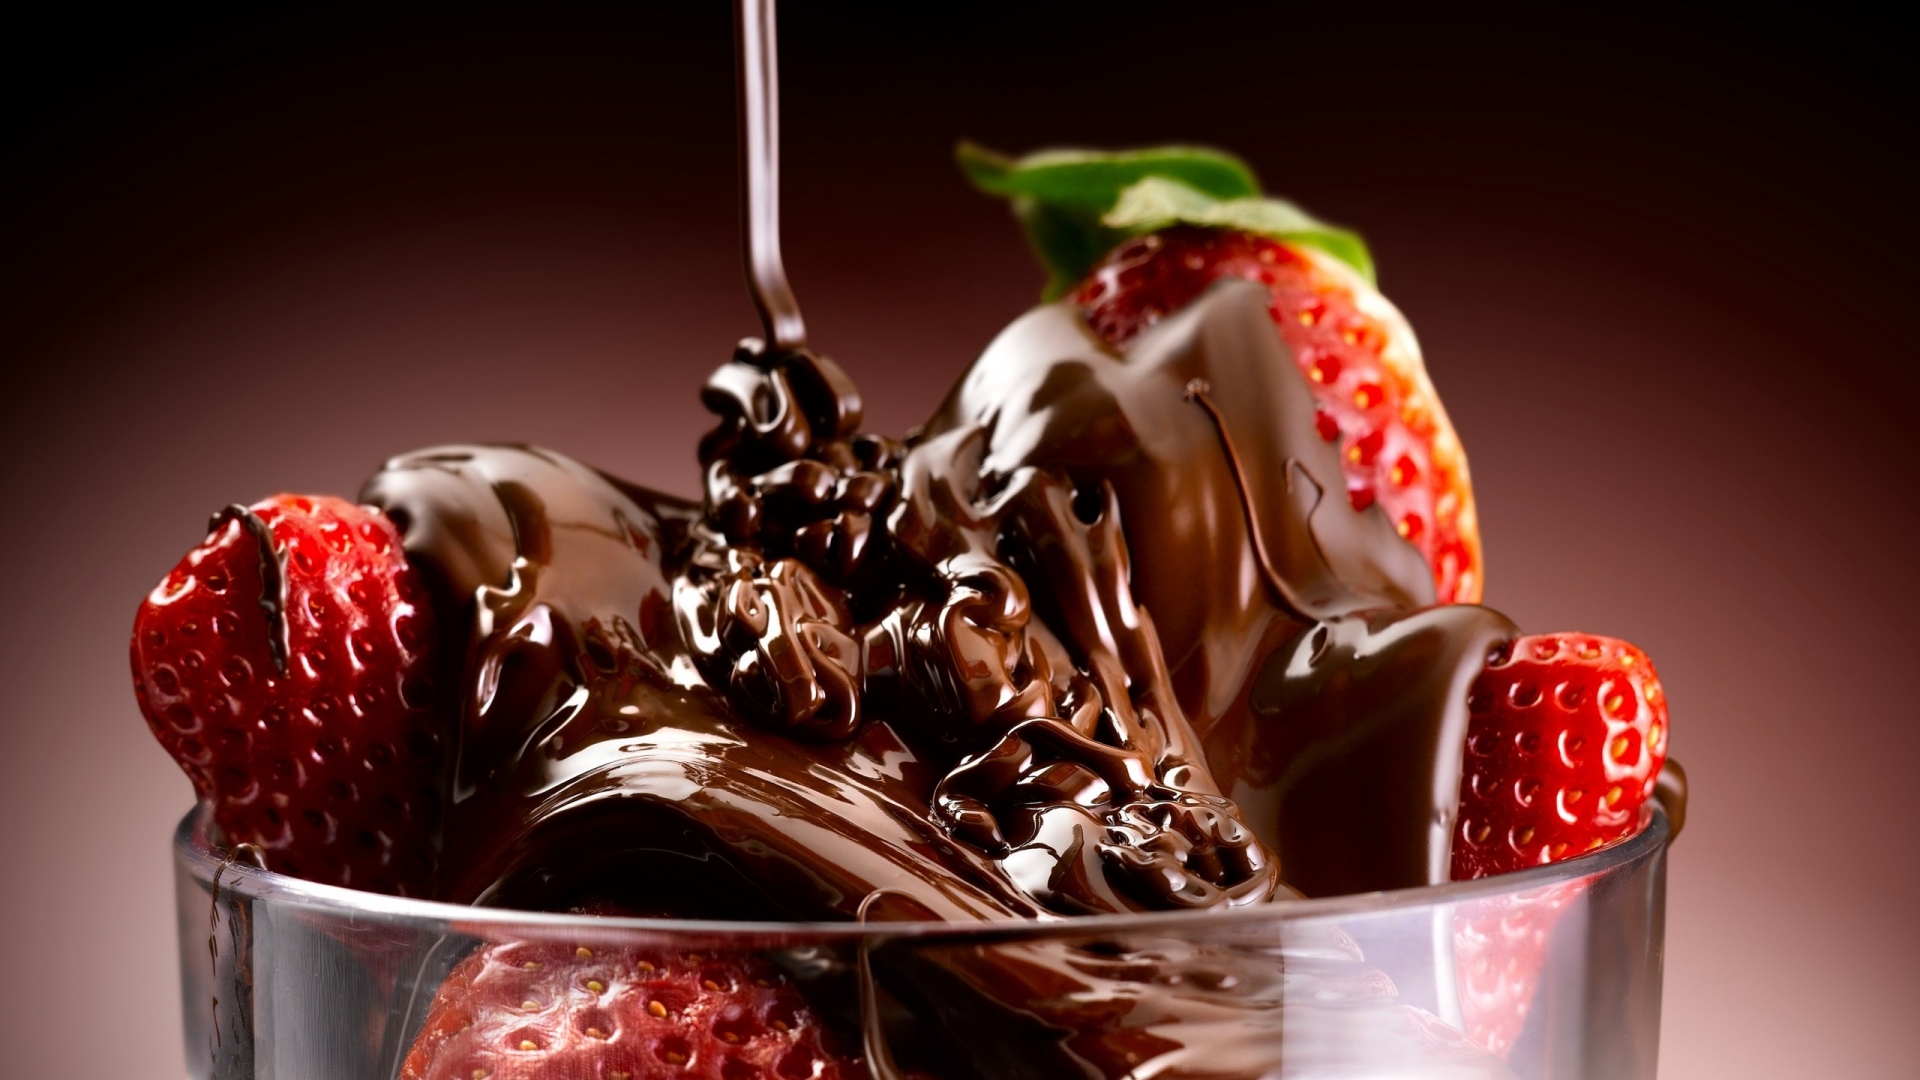 Chocolate and Strawberries for 1920 x 1080 HDTV 1080p resolution